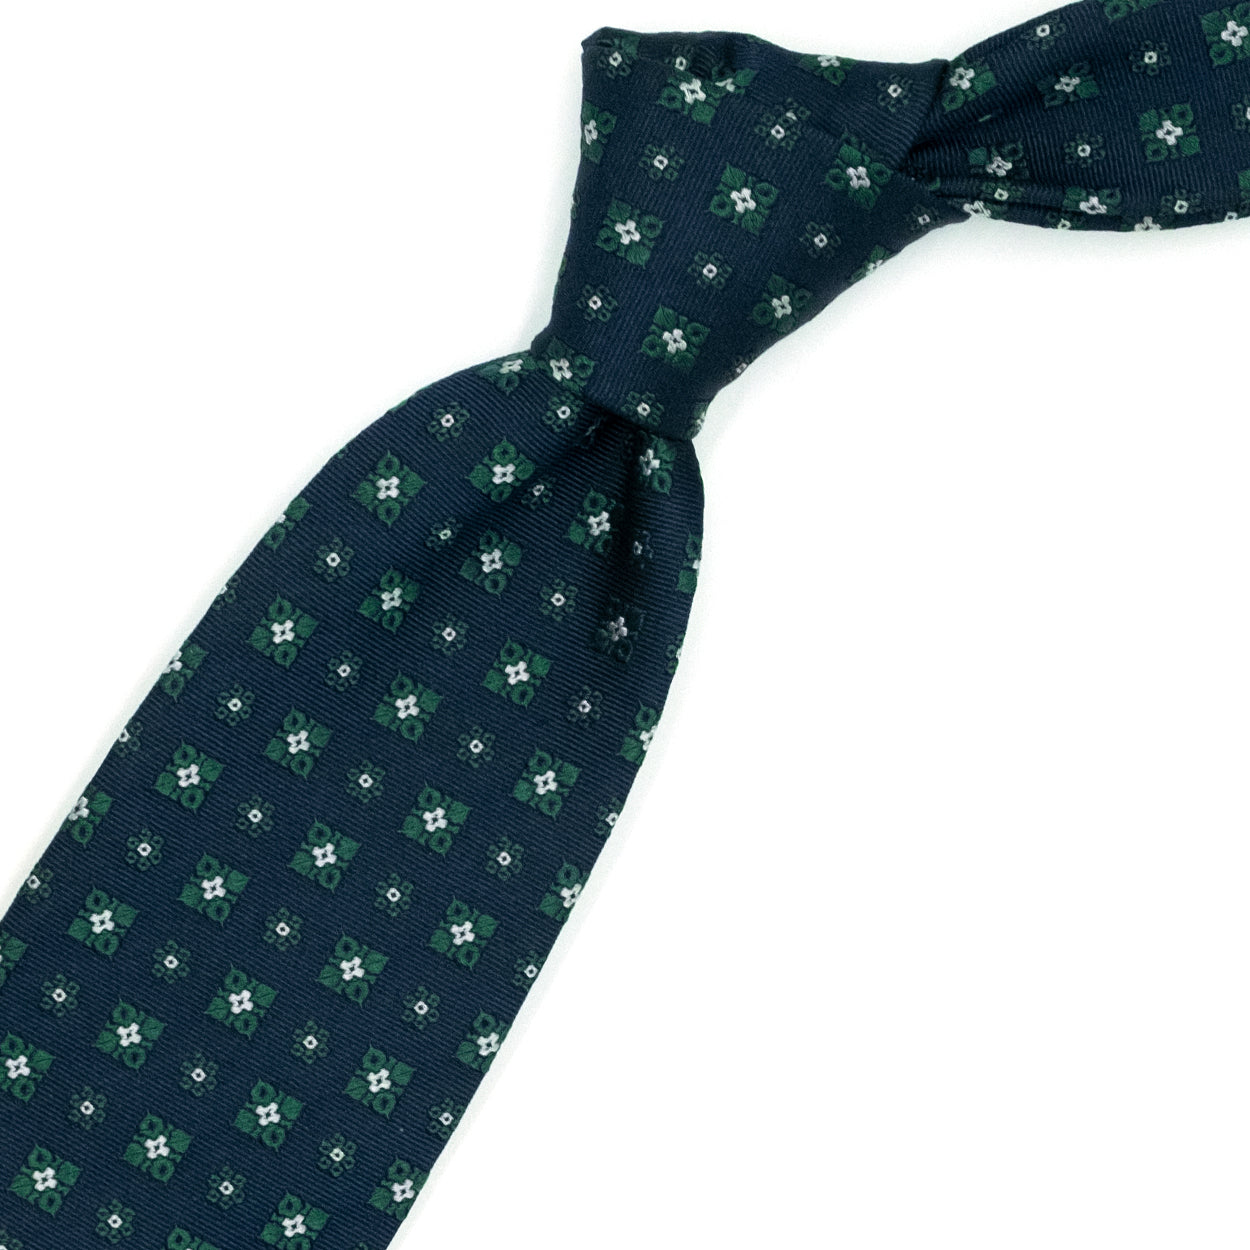 Blue tie with green and white flowers